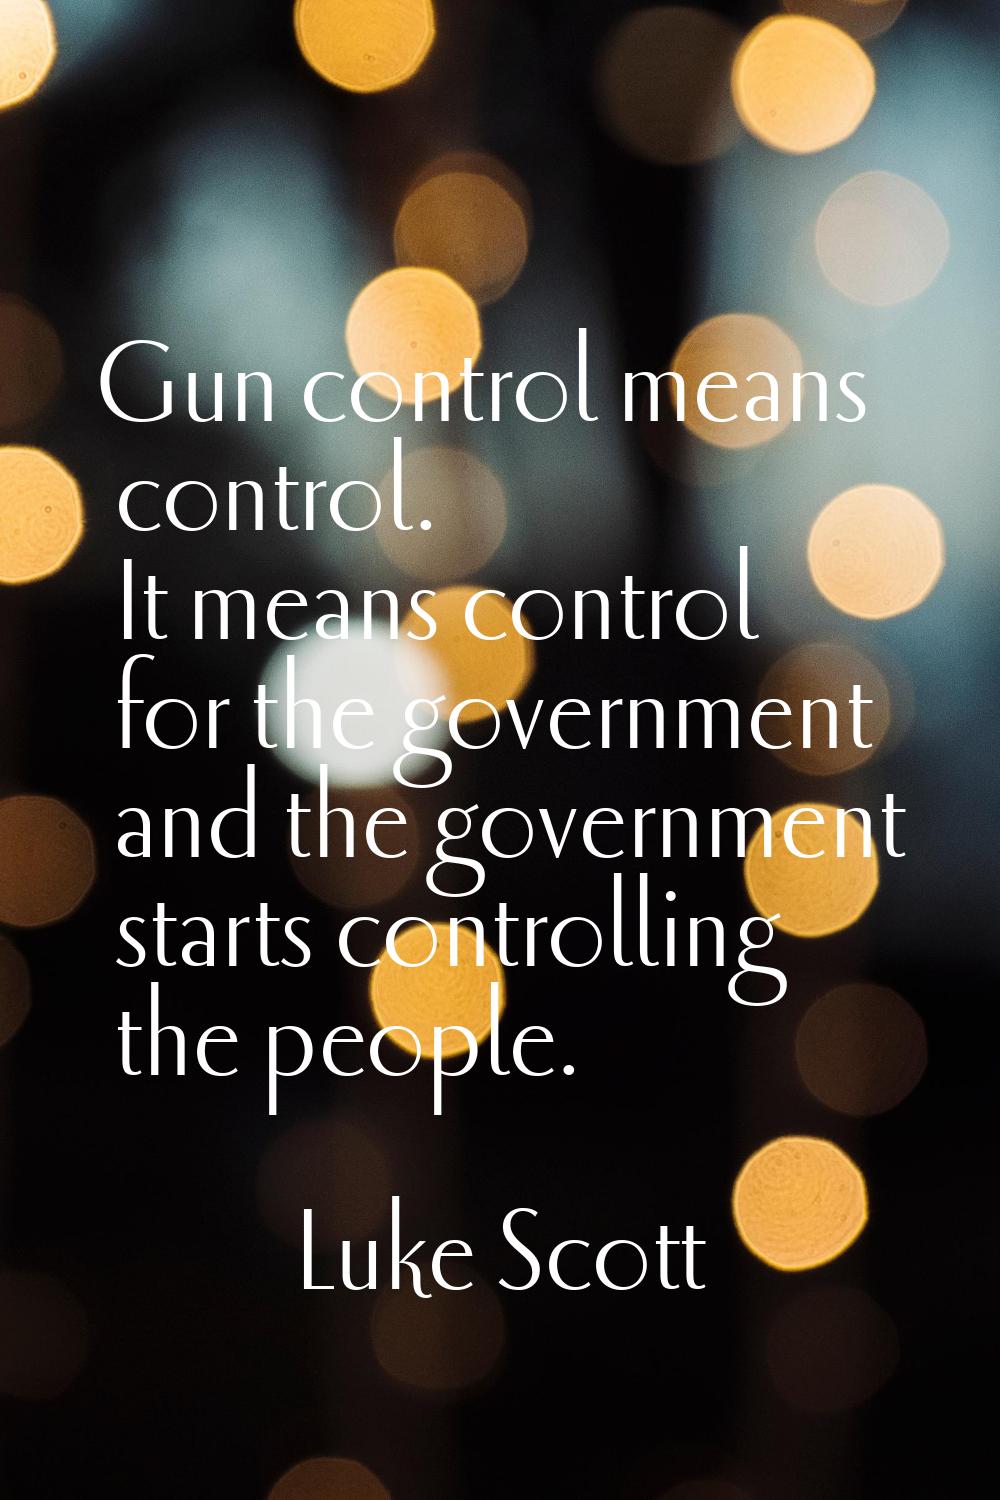 Gun control means control. It means control for the government and the government starts controllin